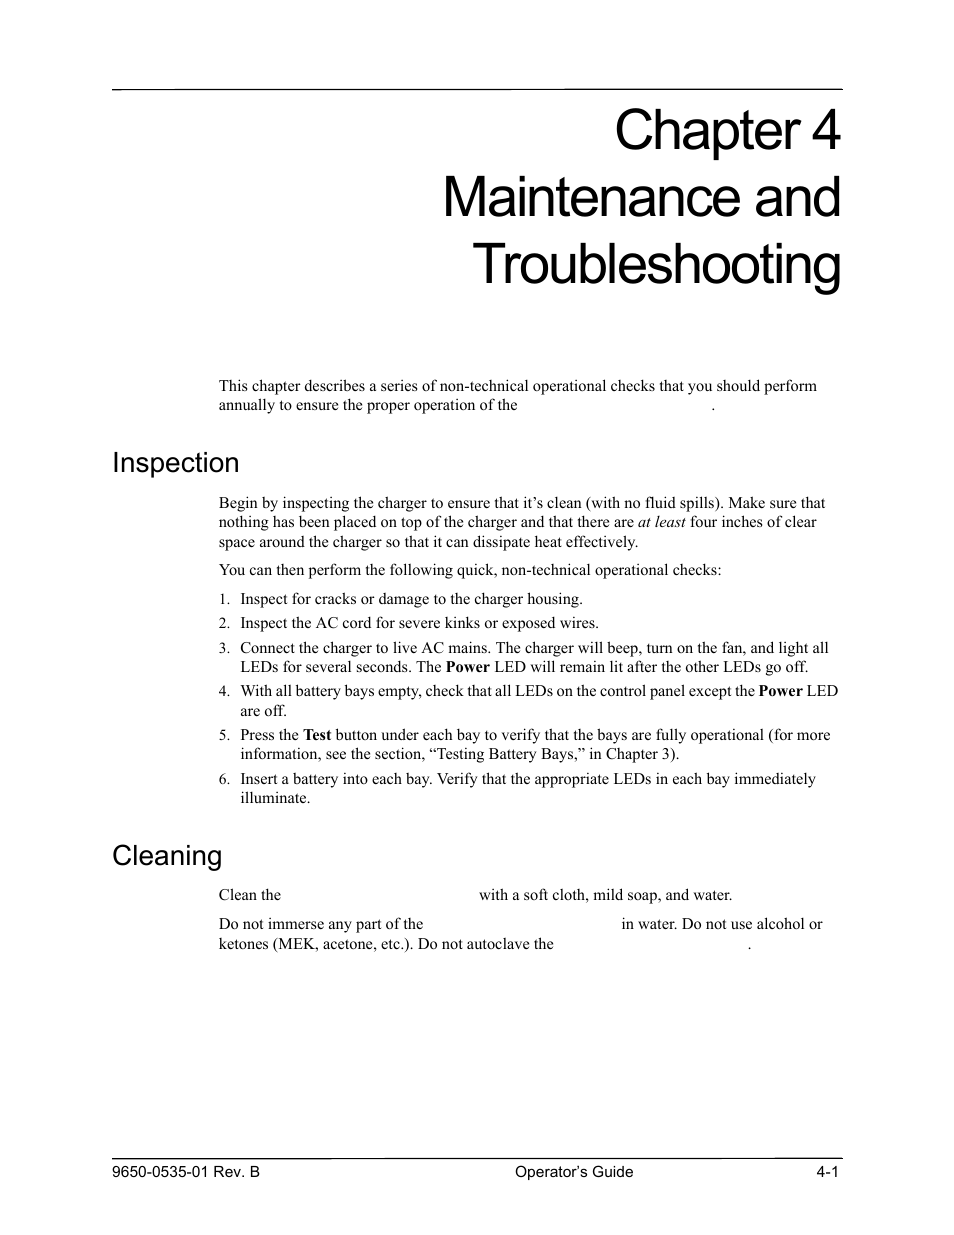 Chapter 4 maintenance and troubleshooting, Inspection, Cleaning | ZOLL SurePower Rev B Charger Station User Manual | Page 33 / 44